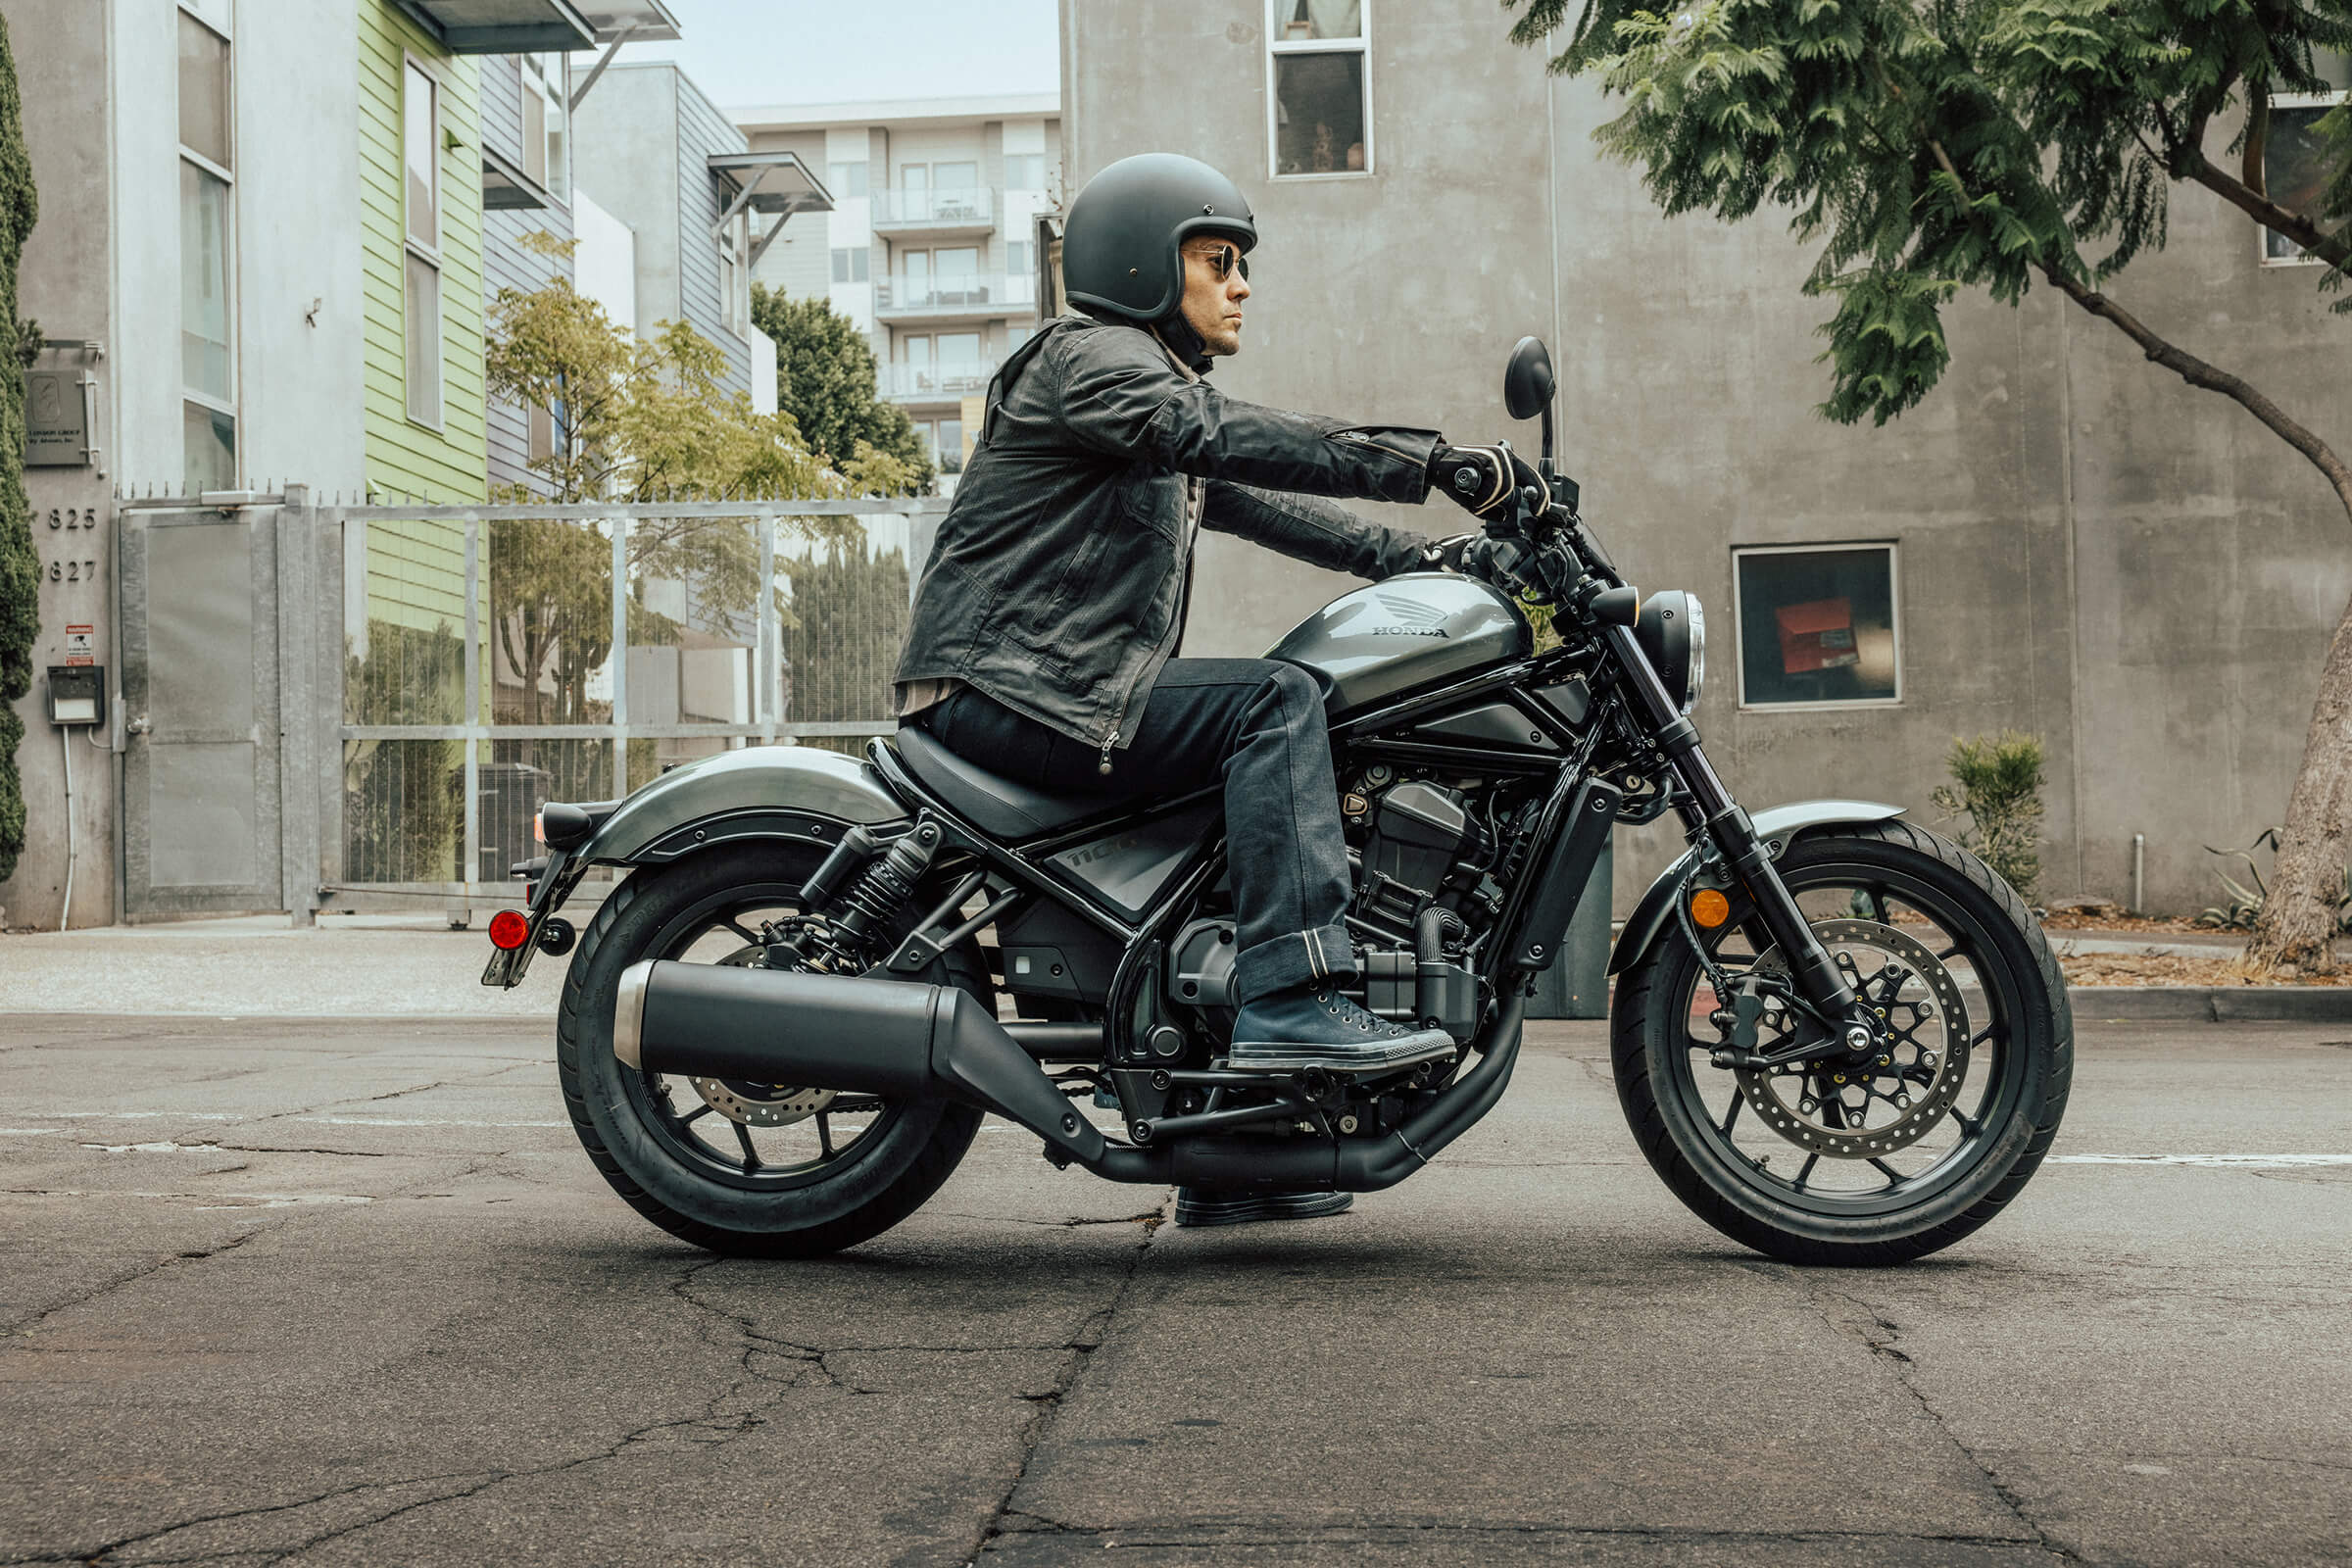 2023 Honda REBEL - 1100 for sale in the Pompano Beach, FL area. Get the best drive out price on 2023 Honda REBEL - 1100 and compare.